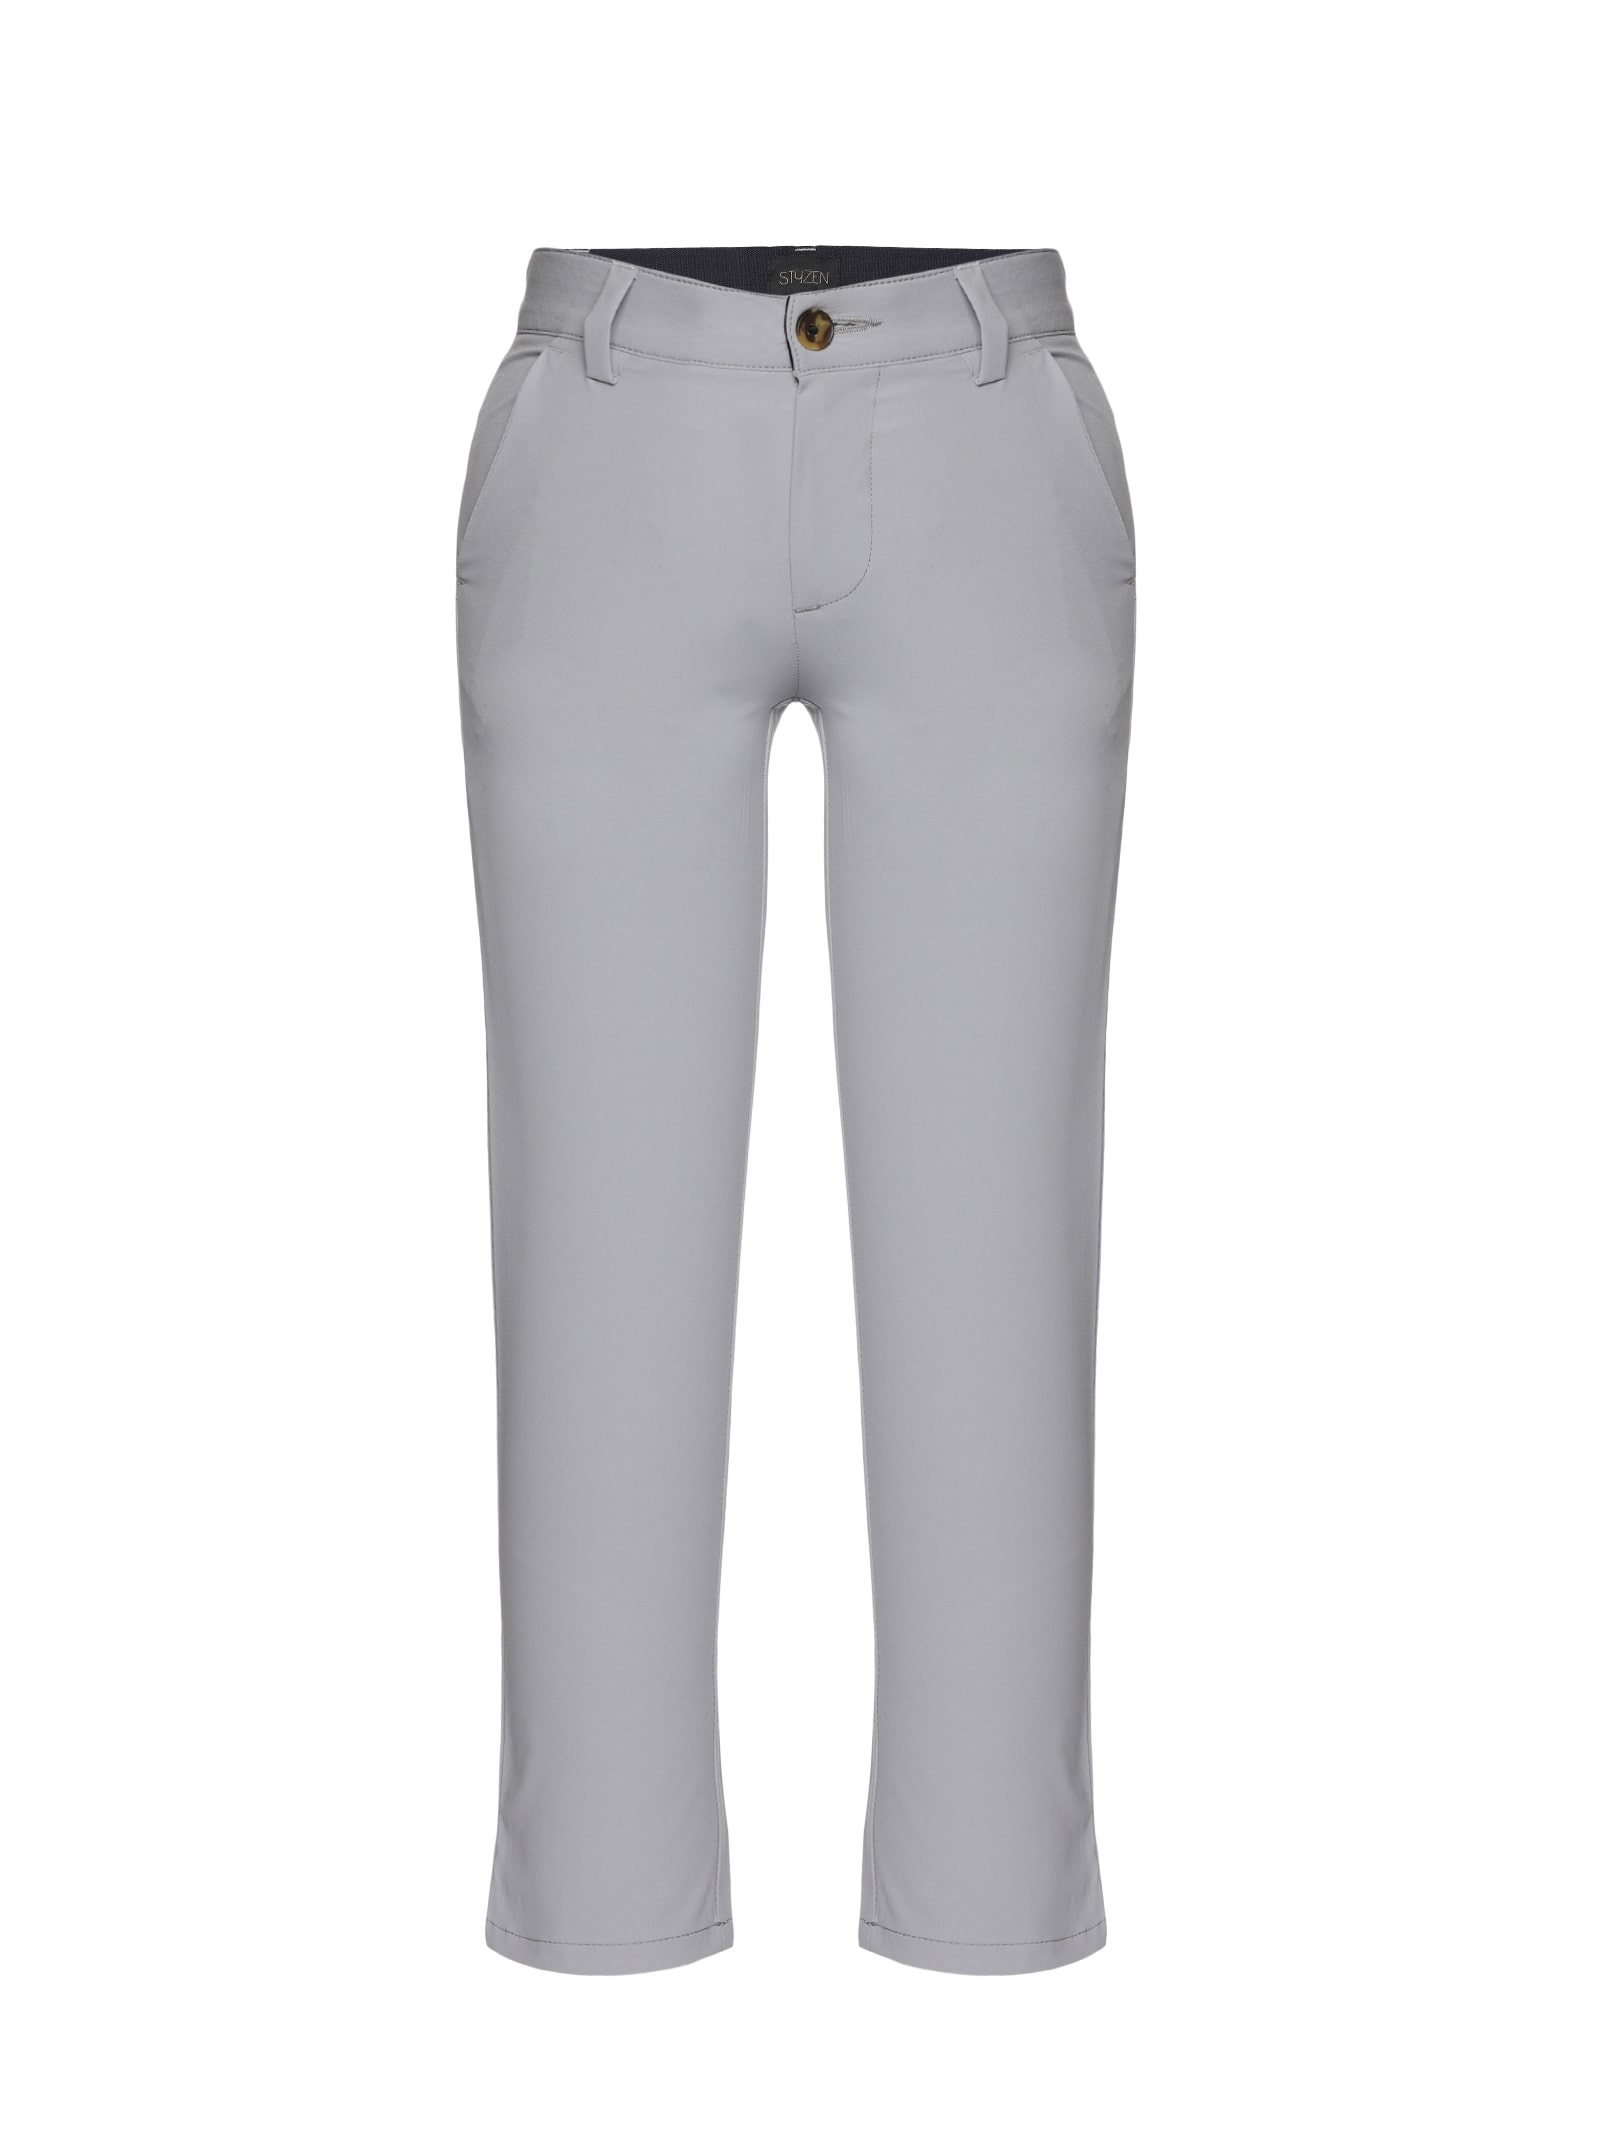 GREY SHOP ALL WORKWEAR TROUSERS